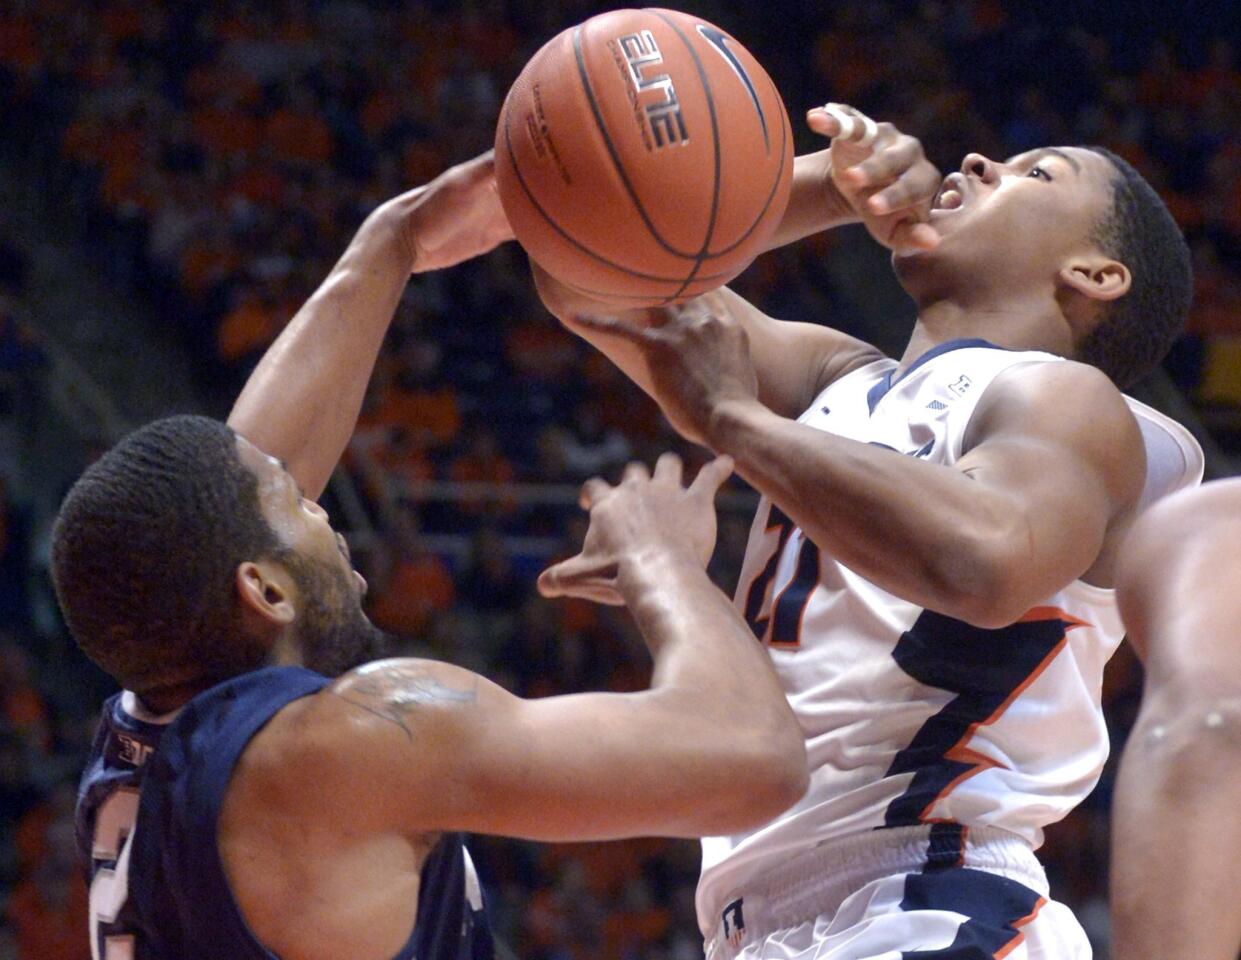 Illinois' guard Malcolm Hill goes up against Penn State's guard D.J. Newbill during the first half.